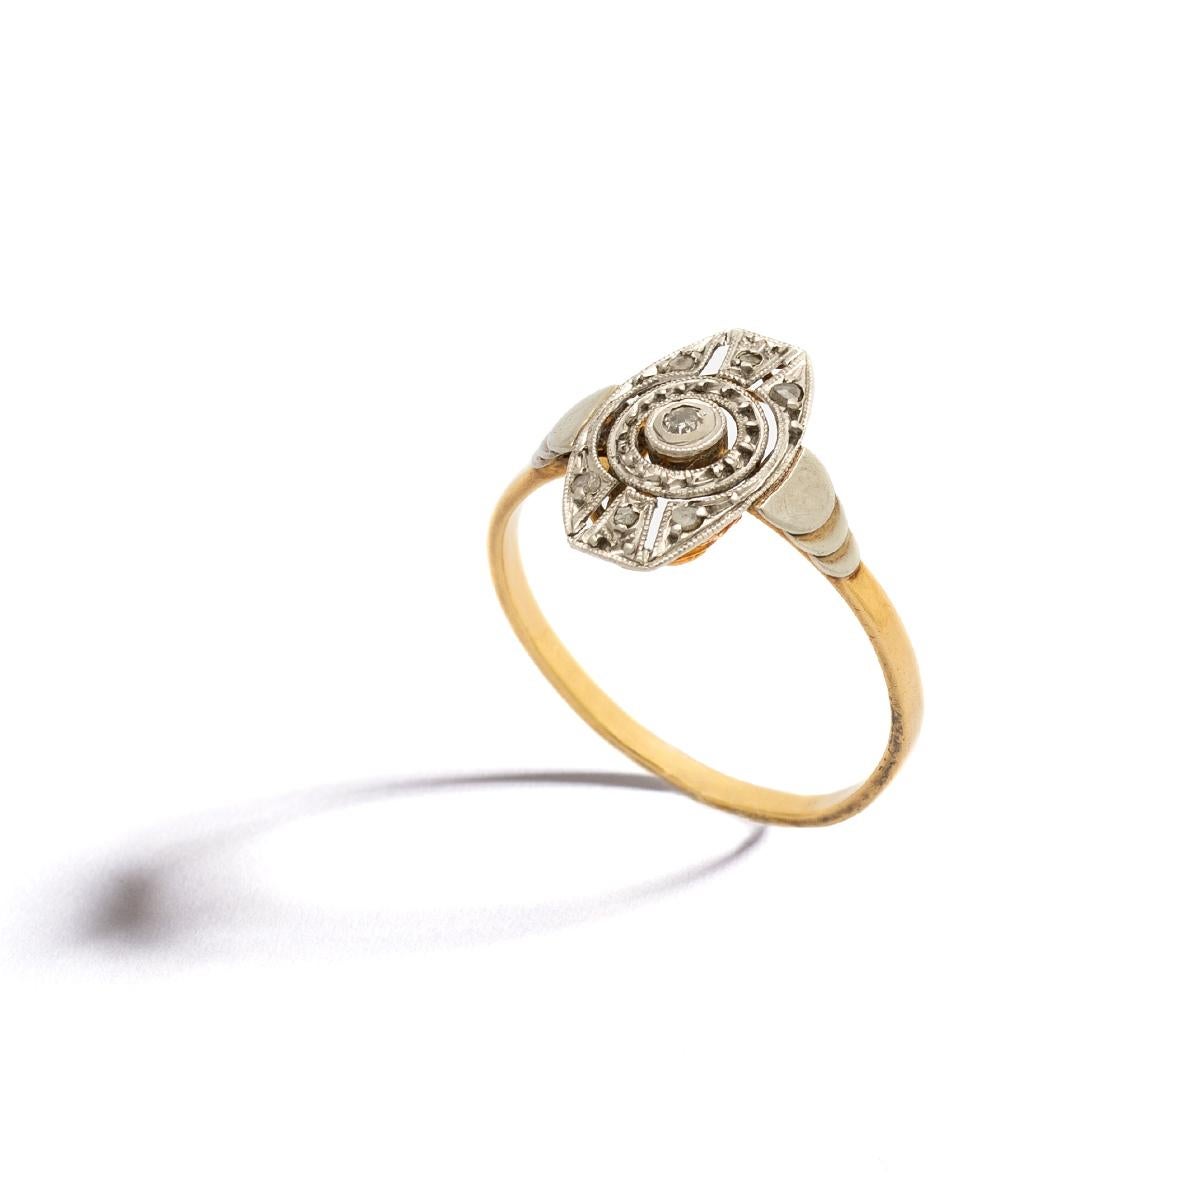 Art Deco Diamond white and yellow gold Ring.
Central pattern size: approximately 13.00 x 6.50 millimeters.
Ring size: 7 3/4.
Gross weight: 2.18 grams.